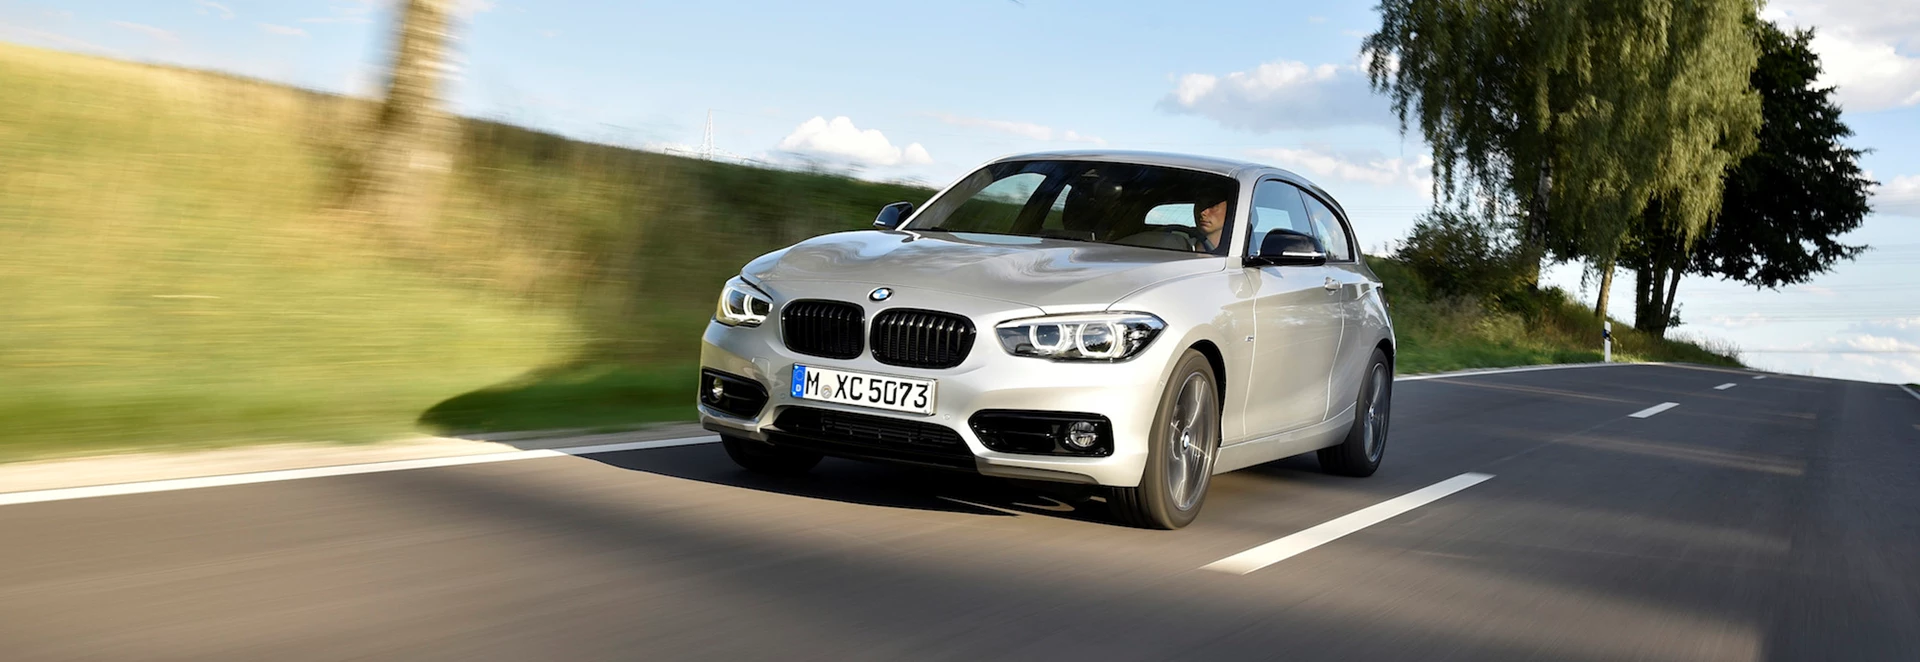 All you need to know about BMW's Motability car scheme